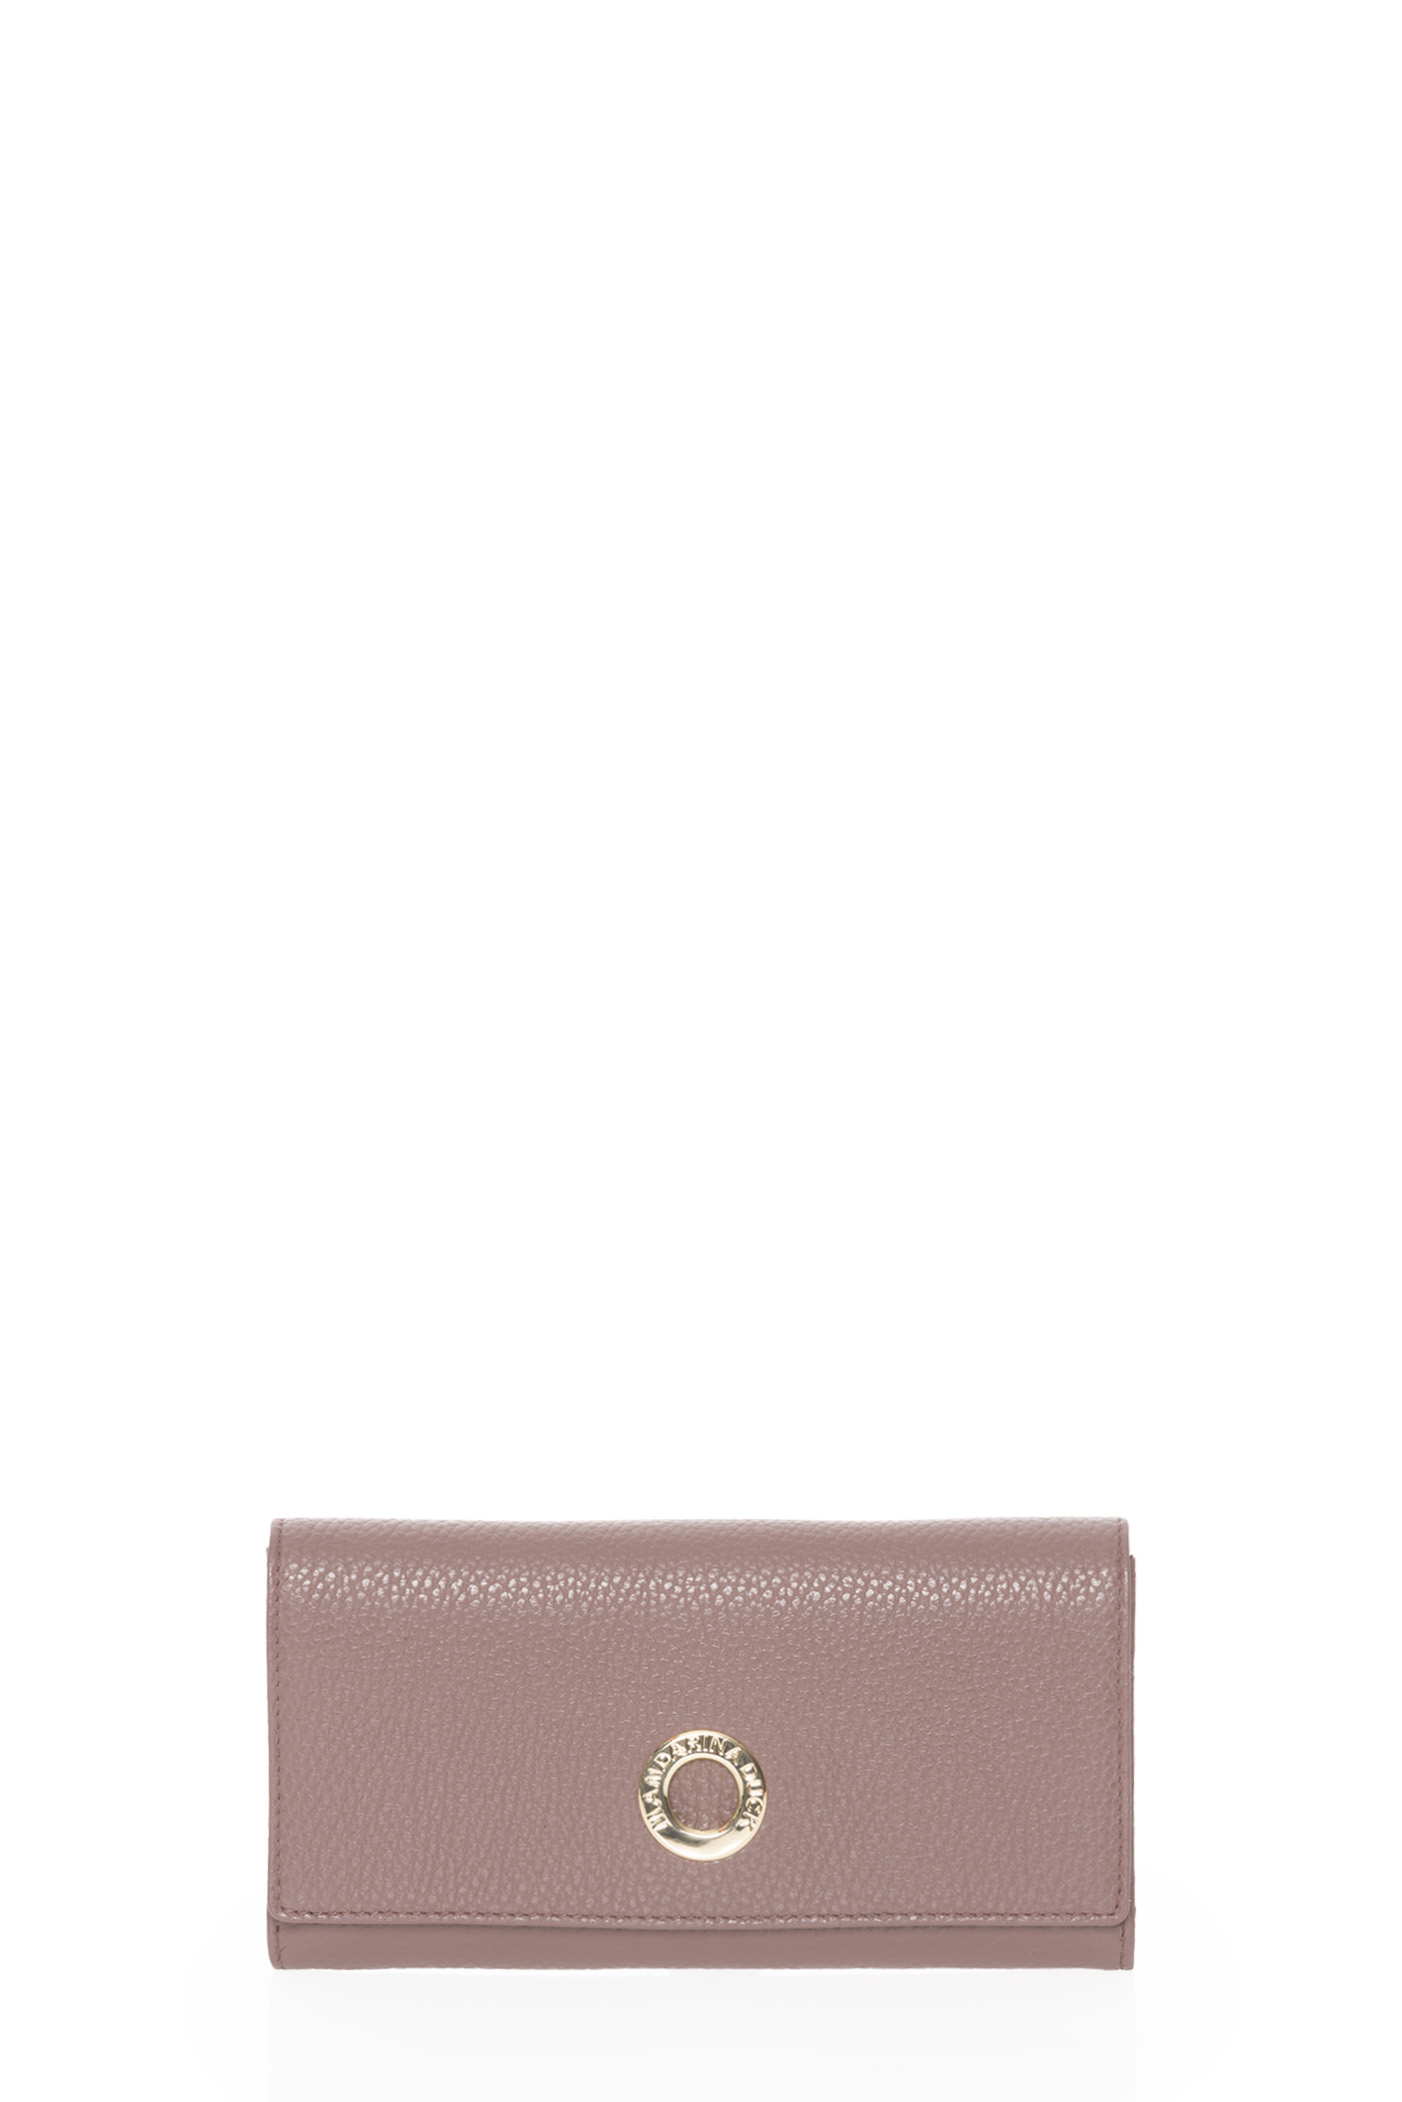 MELLOW LEATHER WALLET